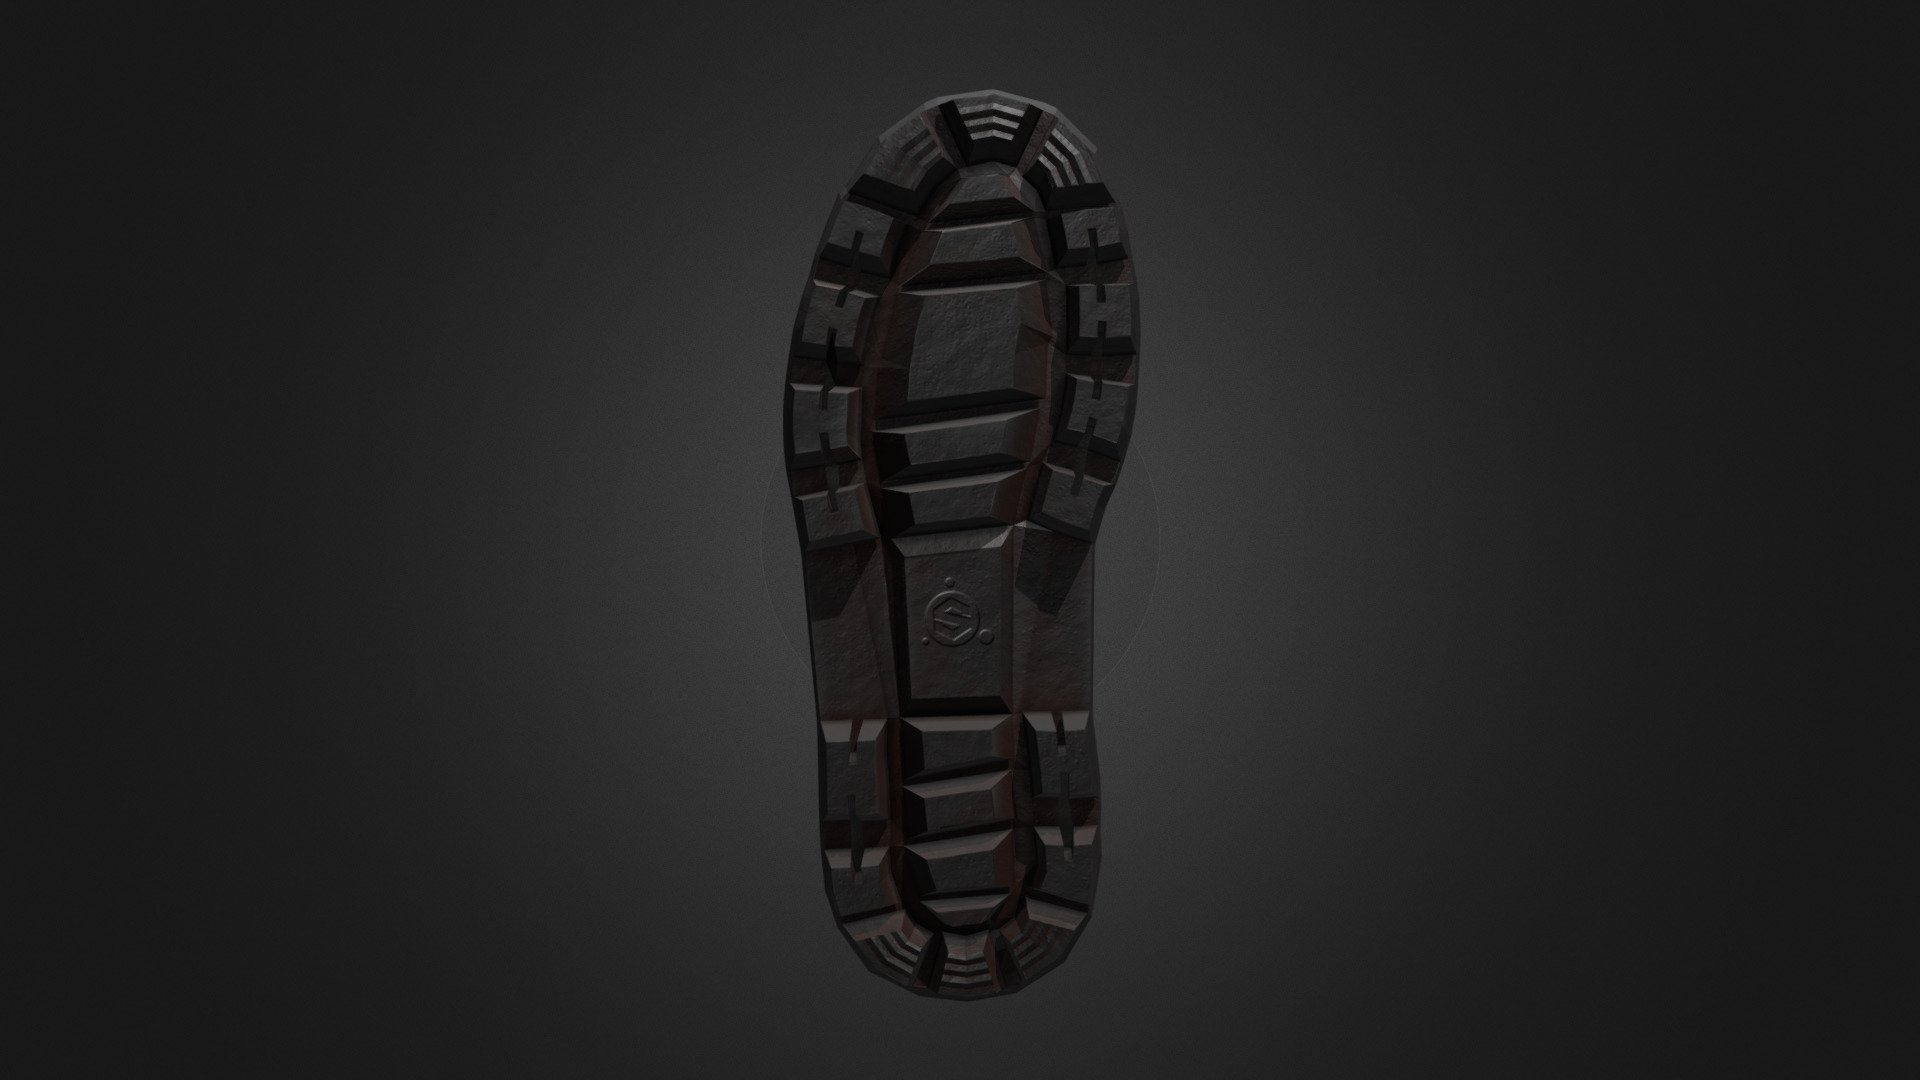 A boot tread for 3d Inktober.

Modelled in Blender, and textured in Substance Painter 3d model